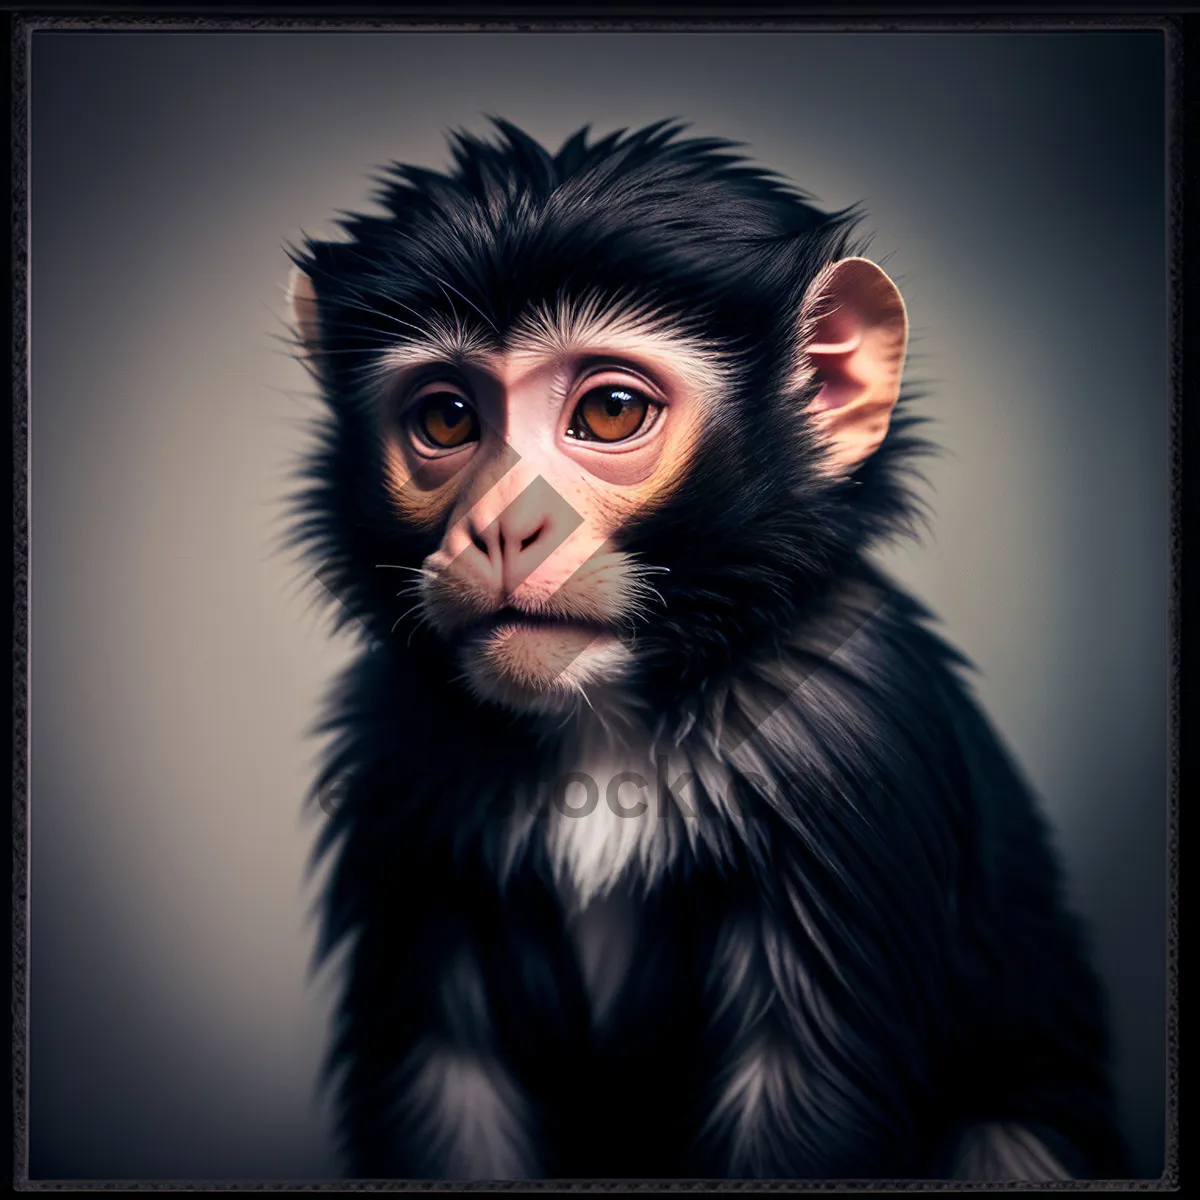 Picture of Adorable Primate Portrait: Curious Black Monkey with Expressive Eyes